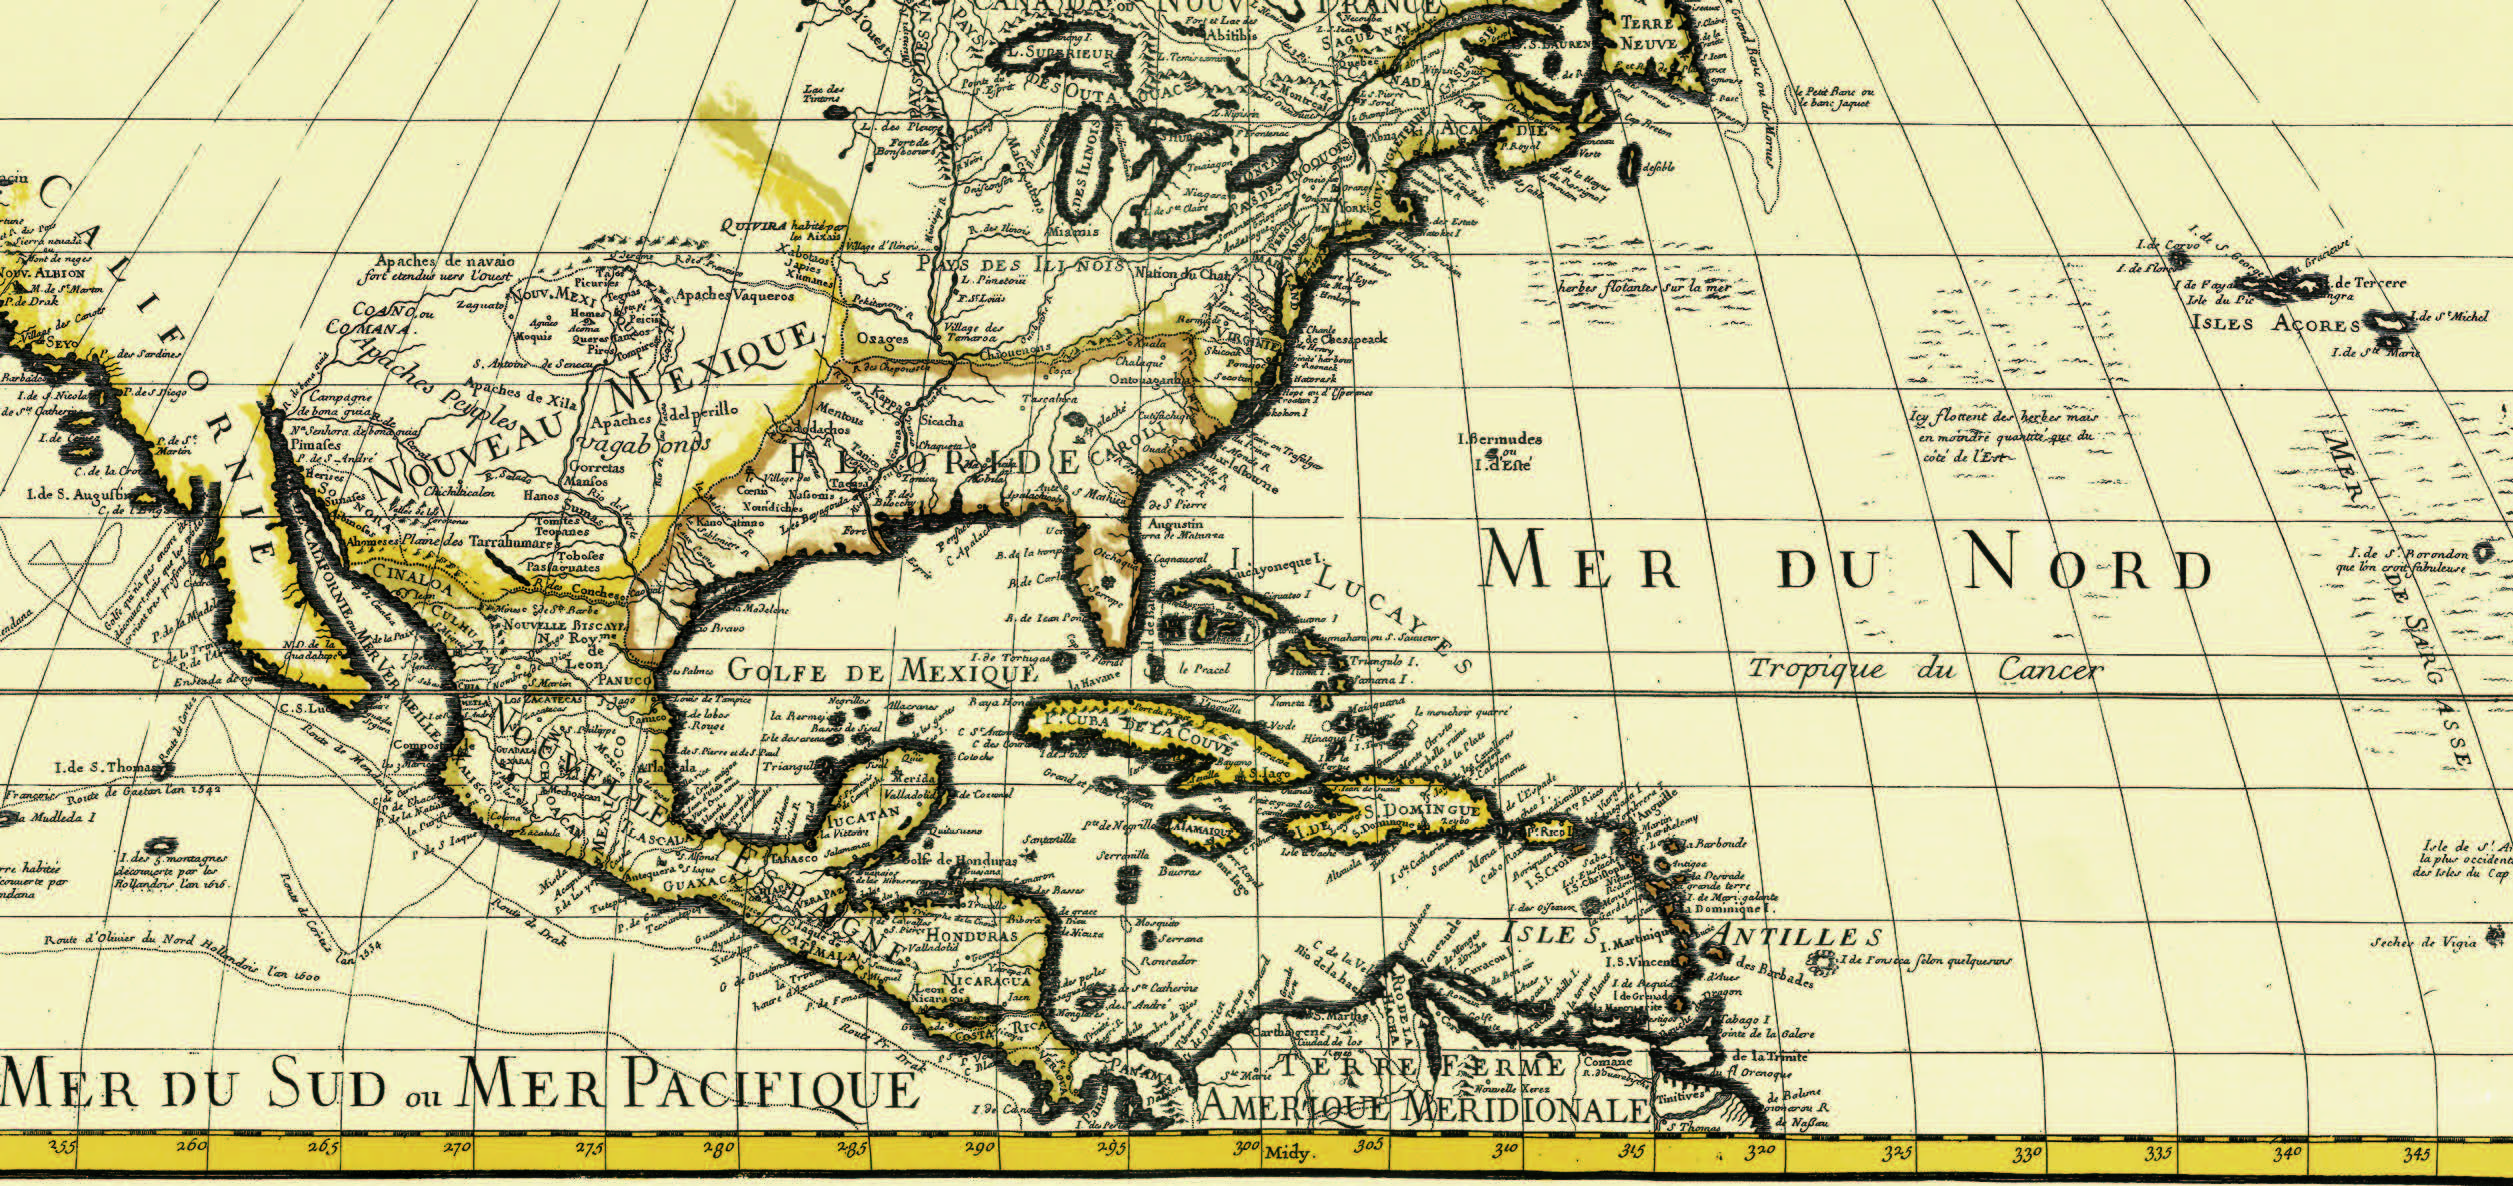 The mythical Isle de Saint Borondon (Saint Brendan’s Isle) is shown at the far right edge of this detail from a French map from 1700 (7.0 1700a).